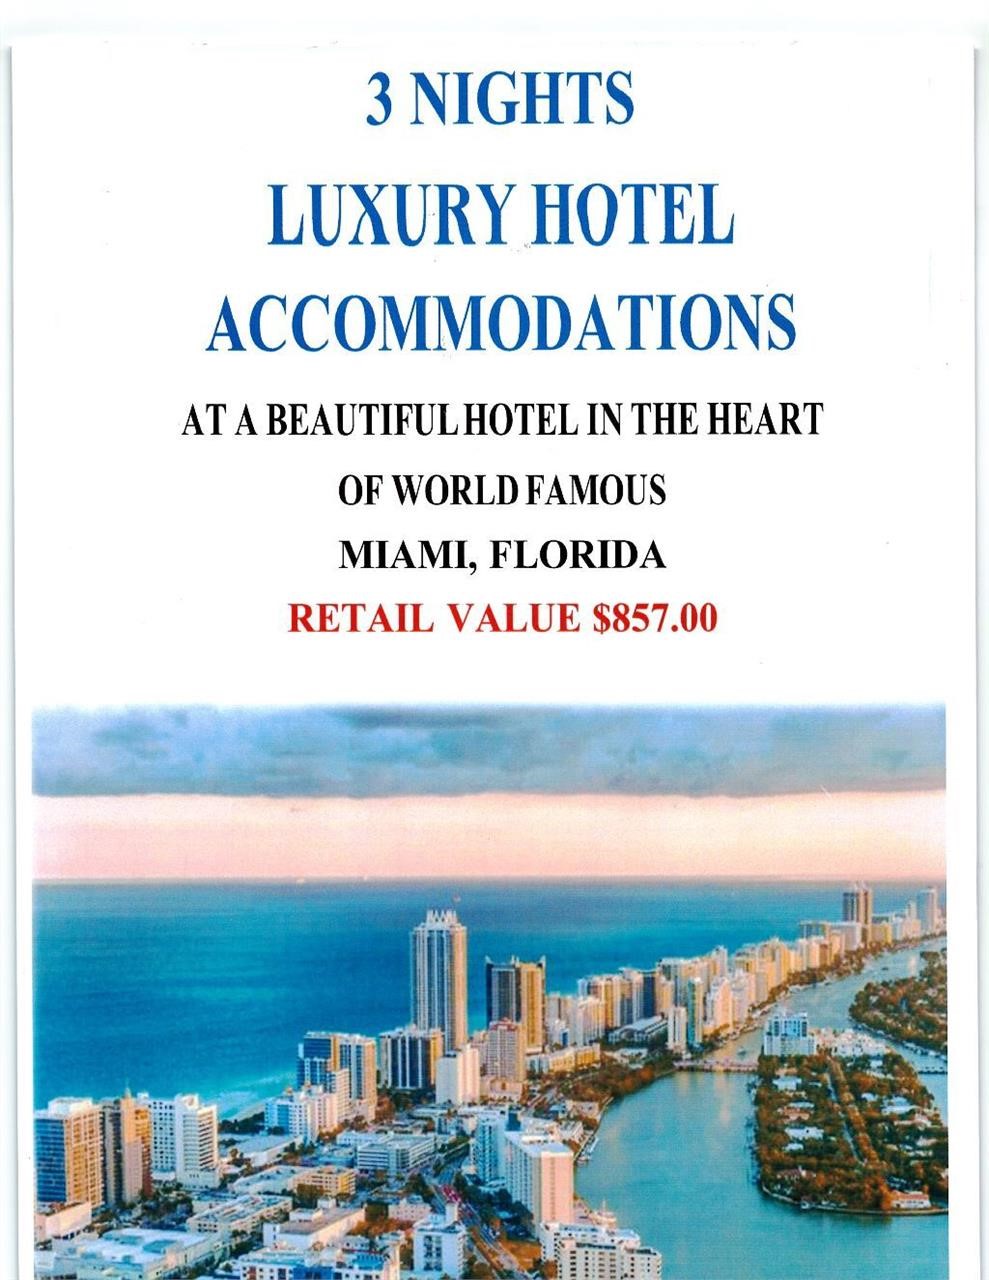 MARCH 14TH. Vacation Hotel Accommodation Packages Auction